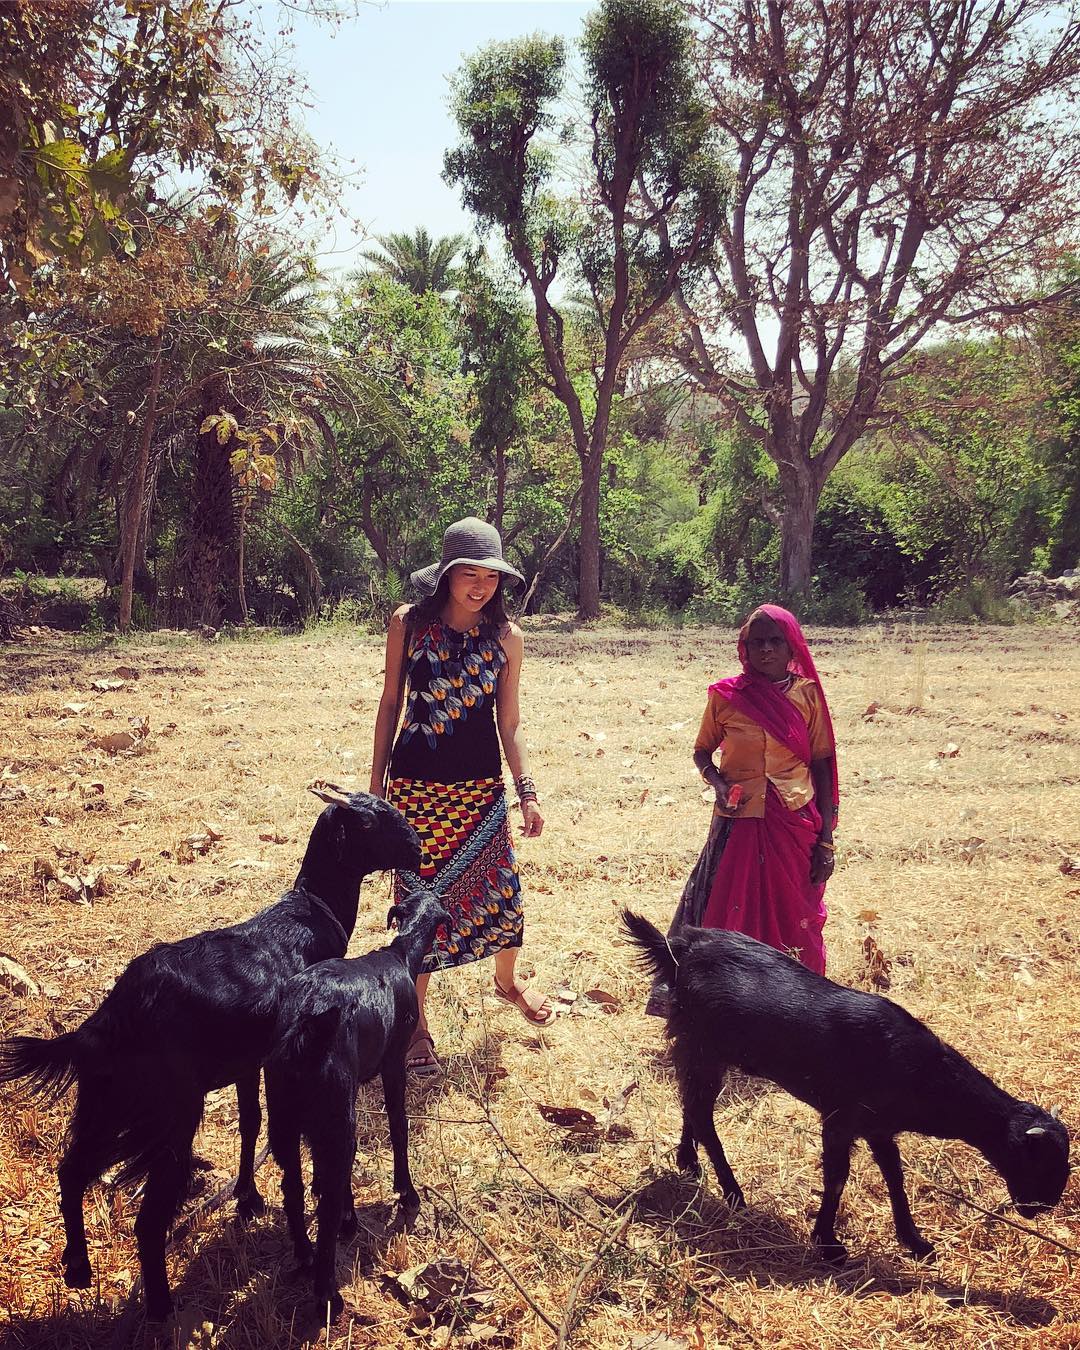 Goats in the Rajasthan Countryside